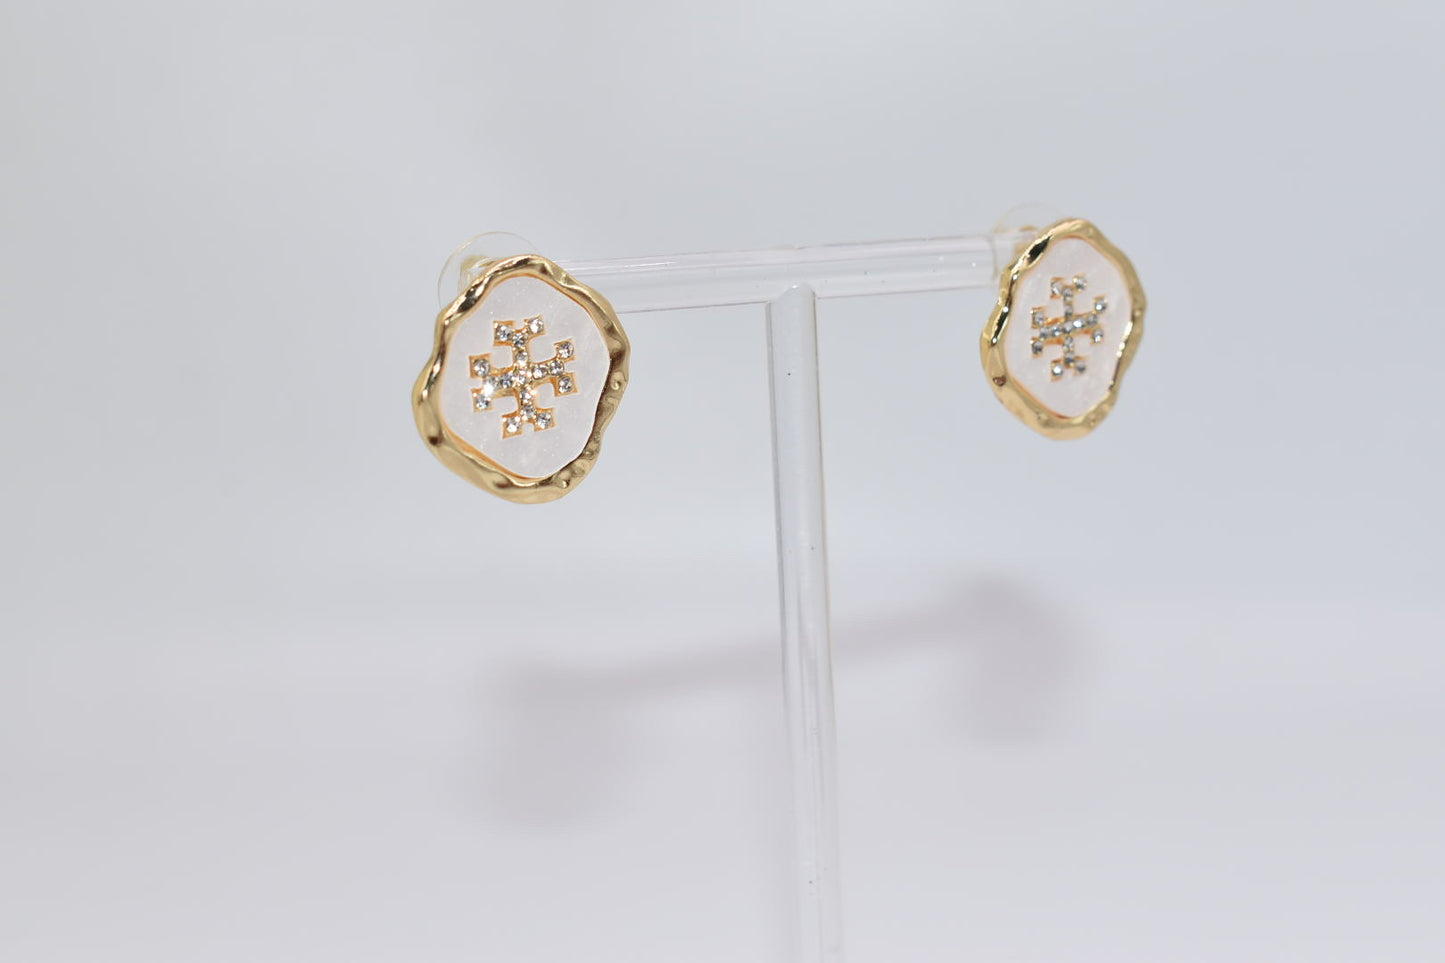 Statement Earrings: Simply Sophisticated White & Gold Stud Earrings